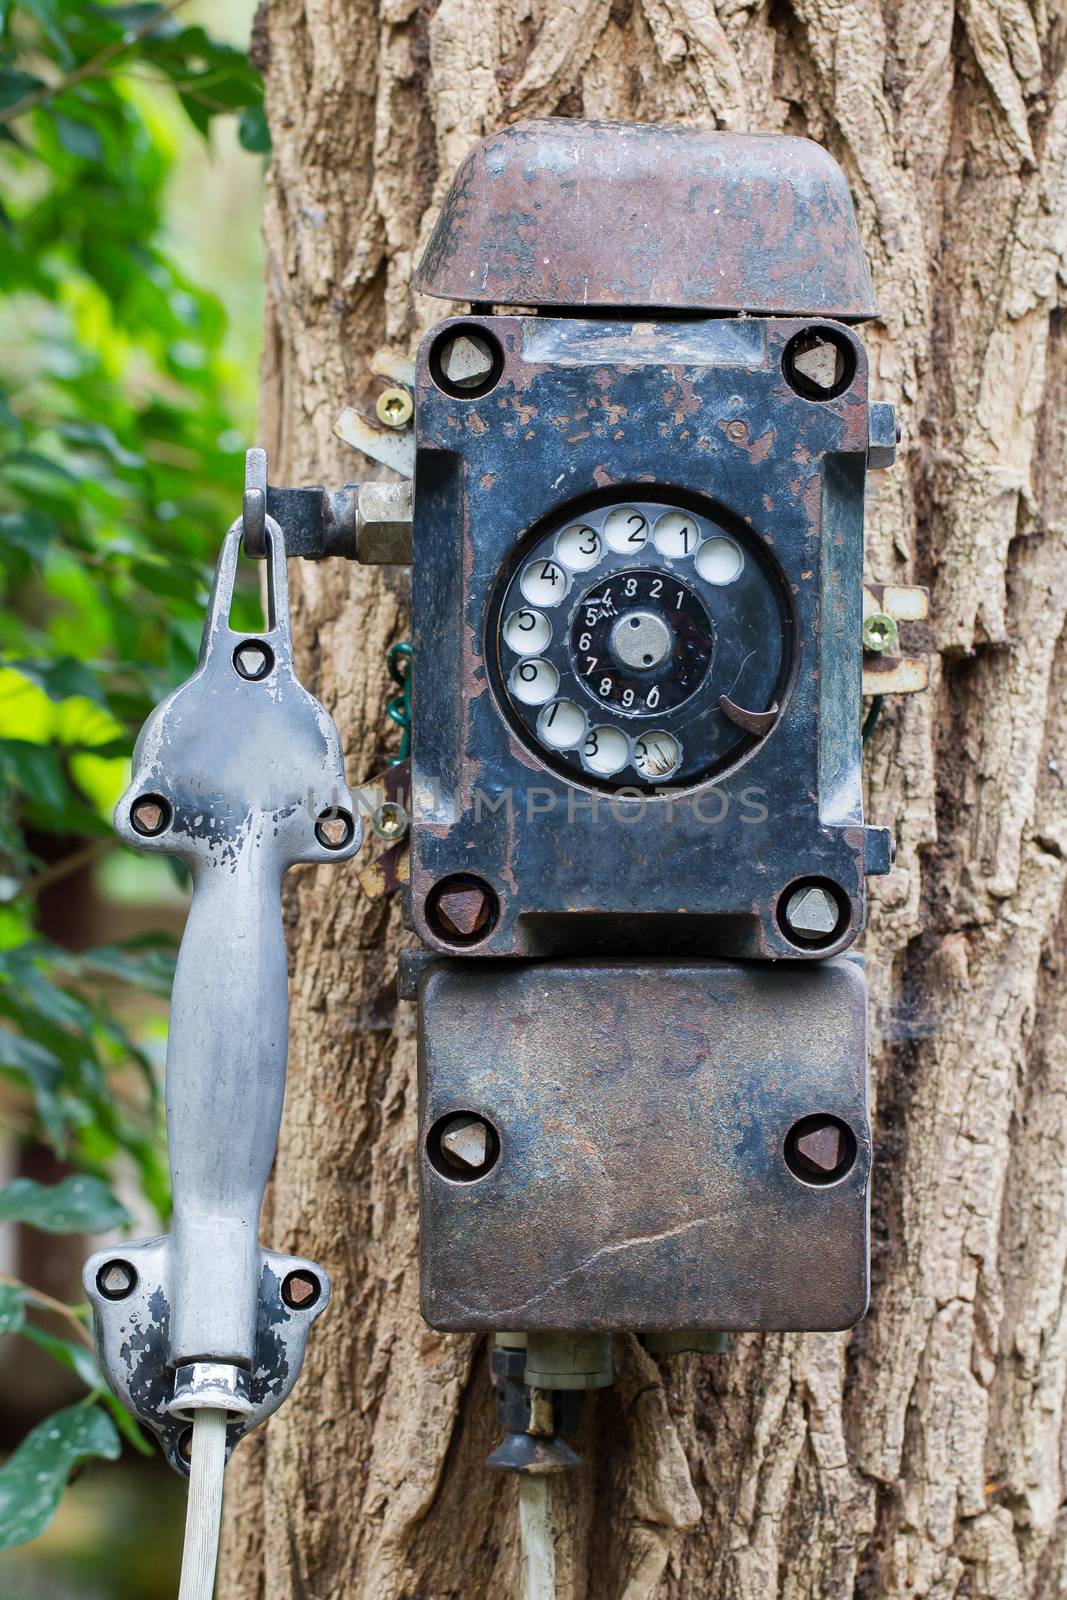 Old black telephone hanging on a tree